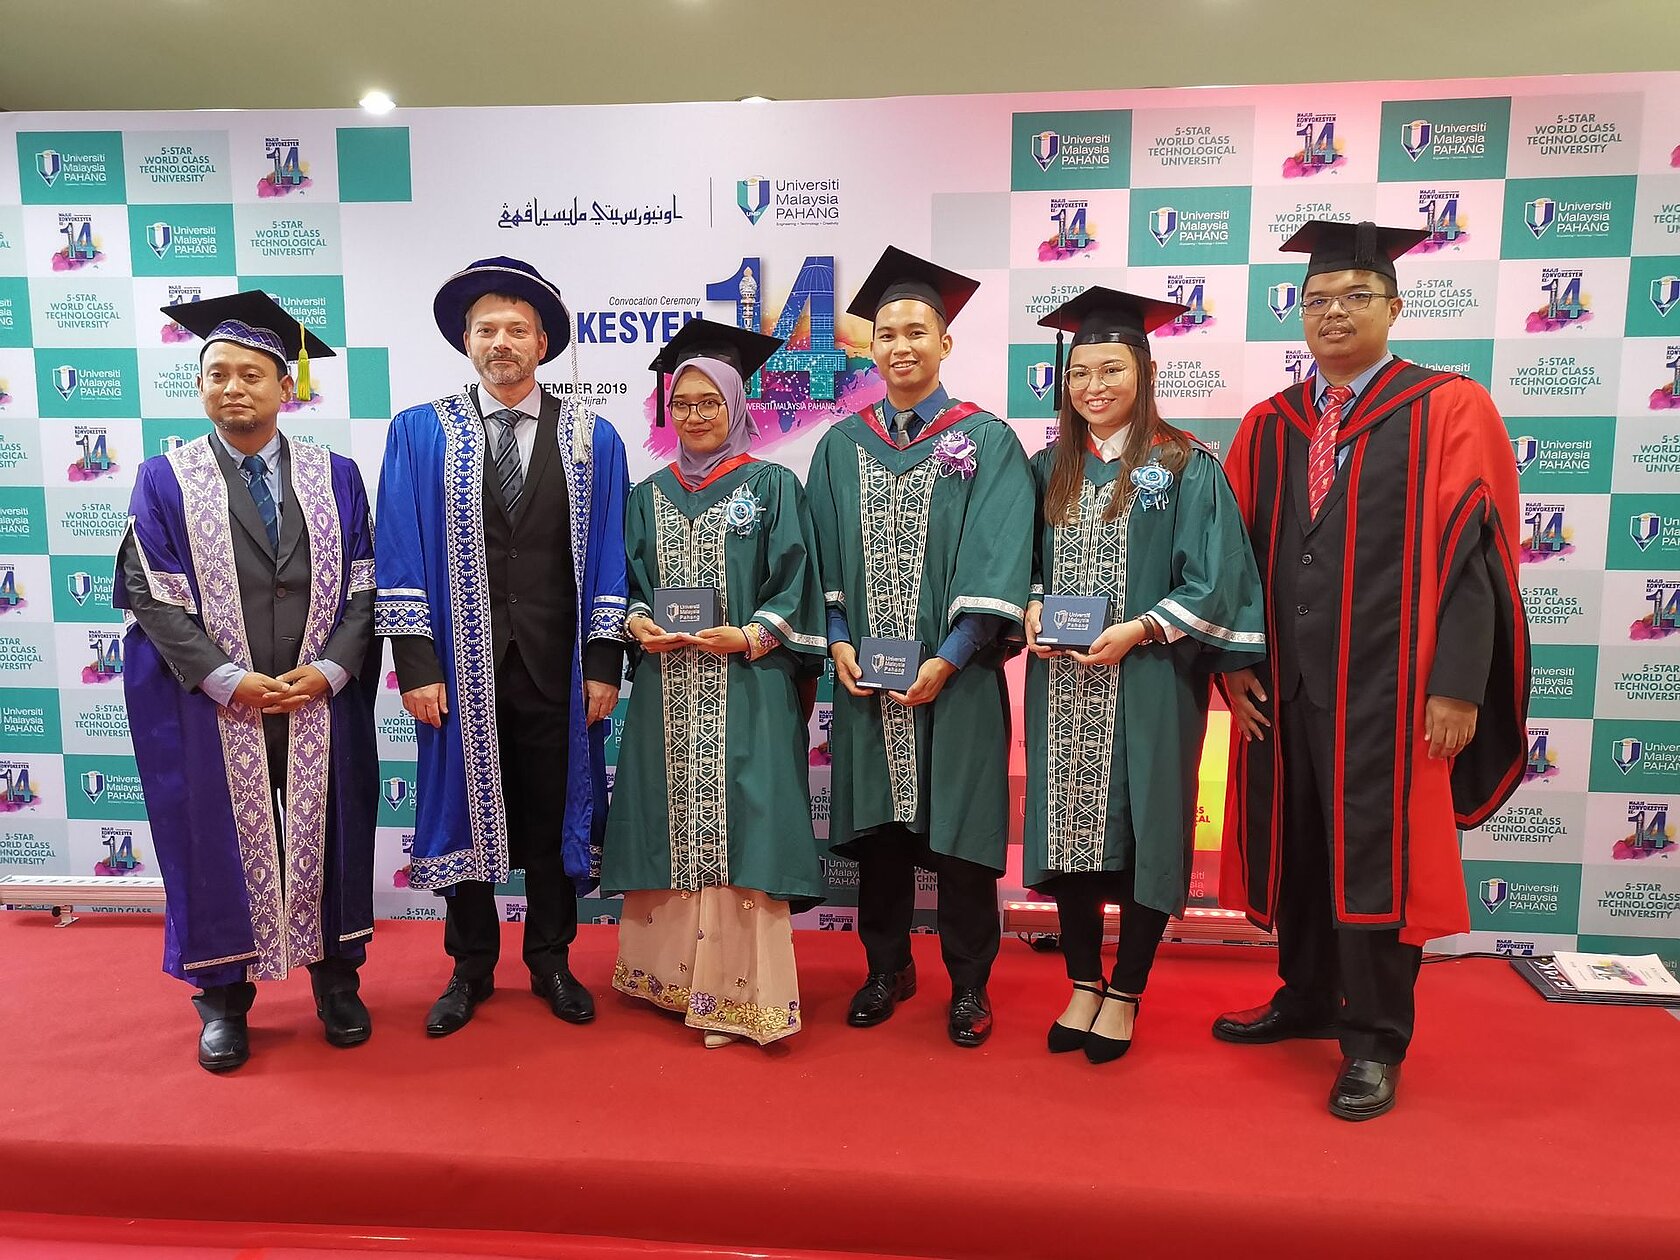 group of young people in robes and mortarboards at a Malaysian graduation ceremony